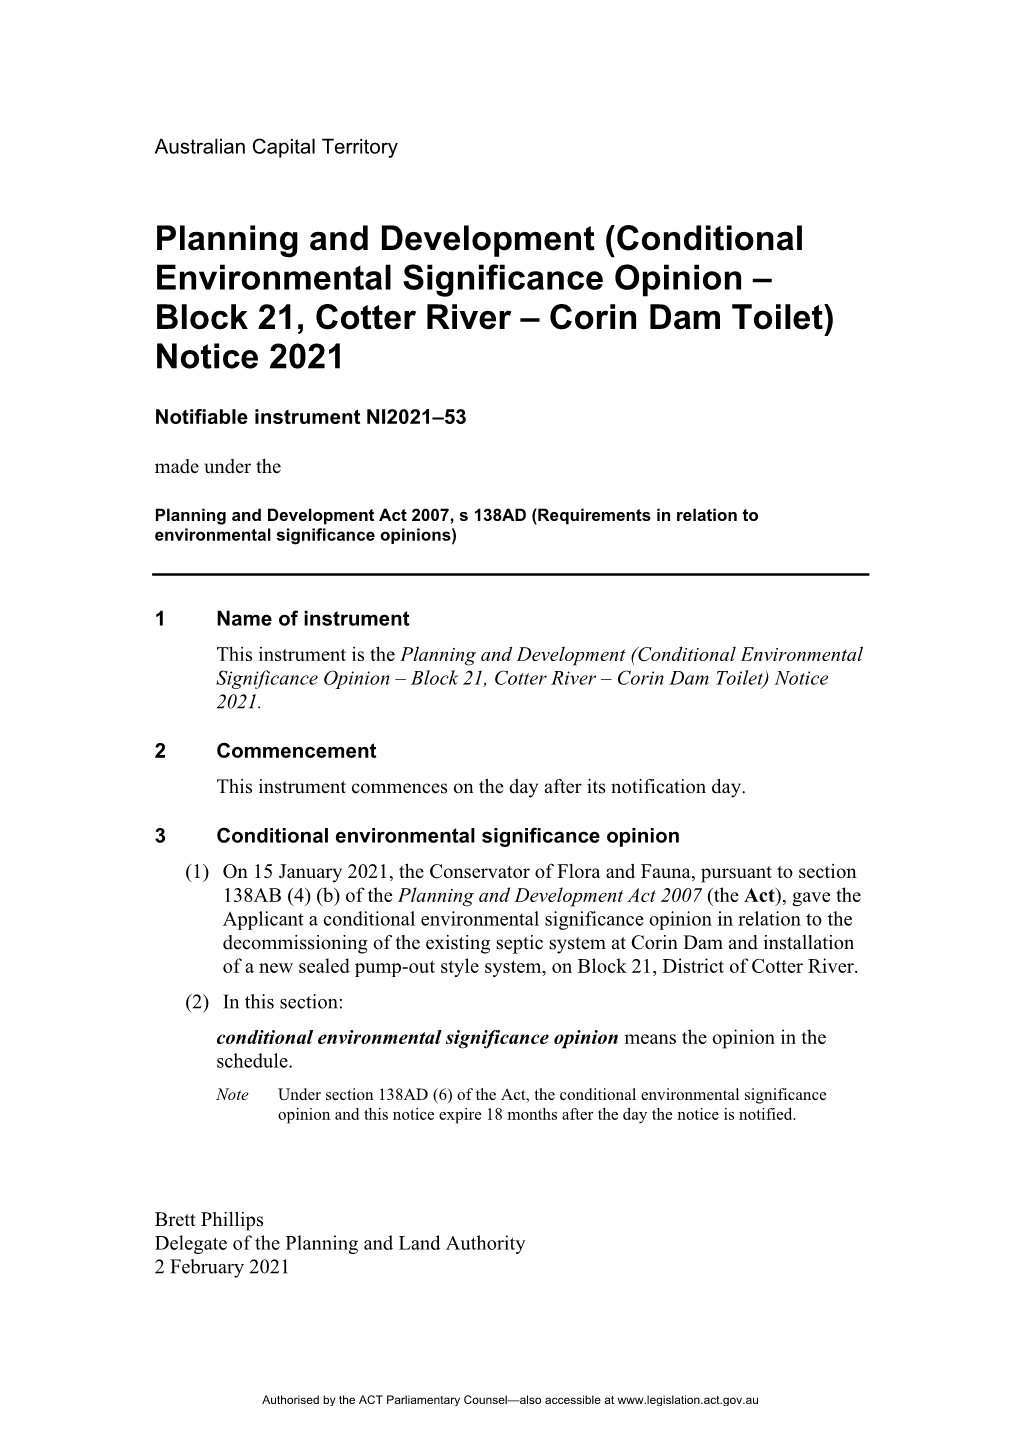 (Conditional Environmental Significance Opinion – Block 21, Cotter River – Corin Dam Toilet) Notice 2021